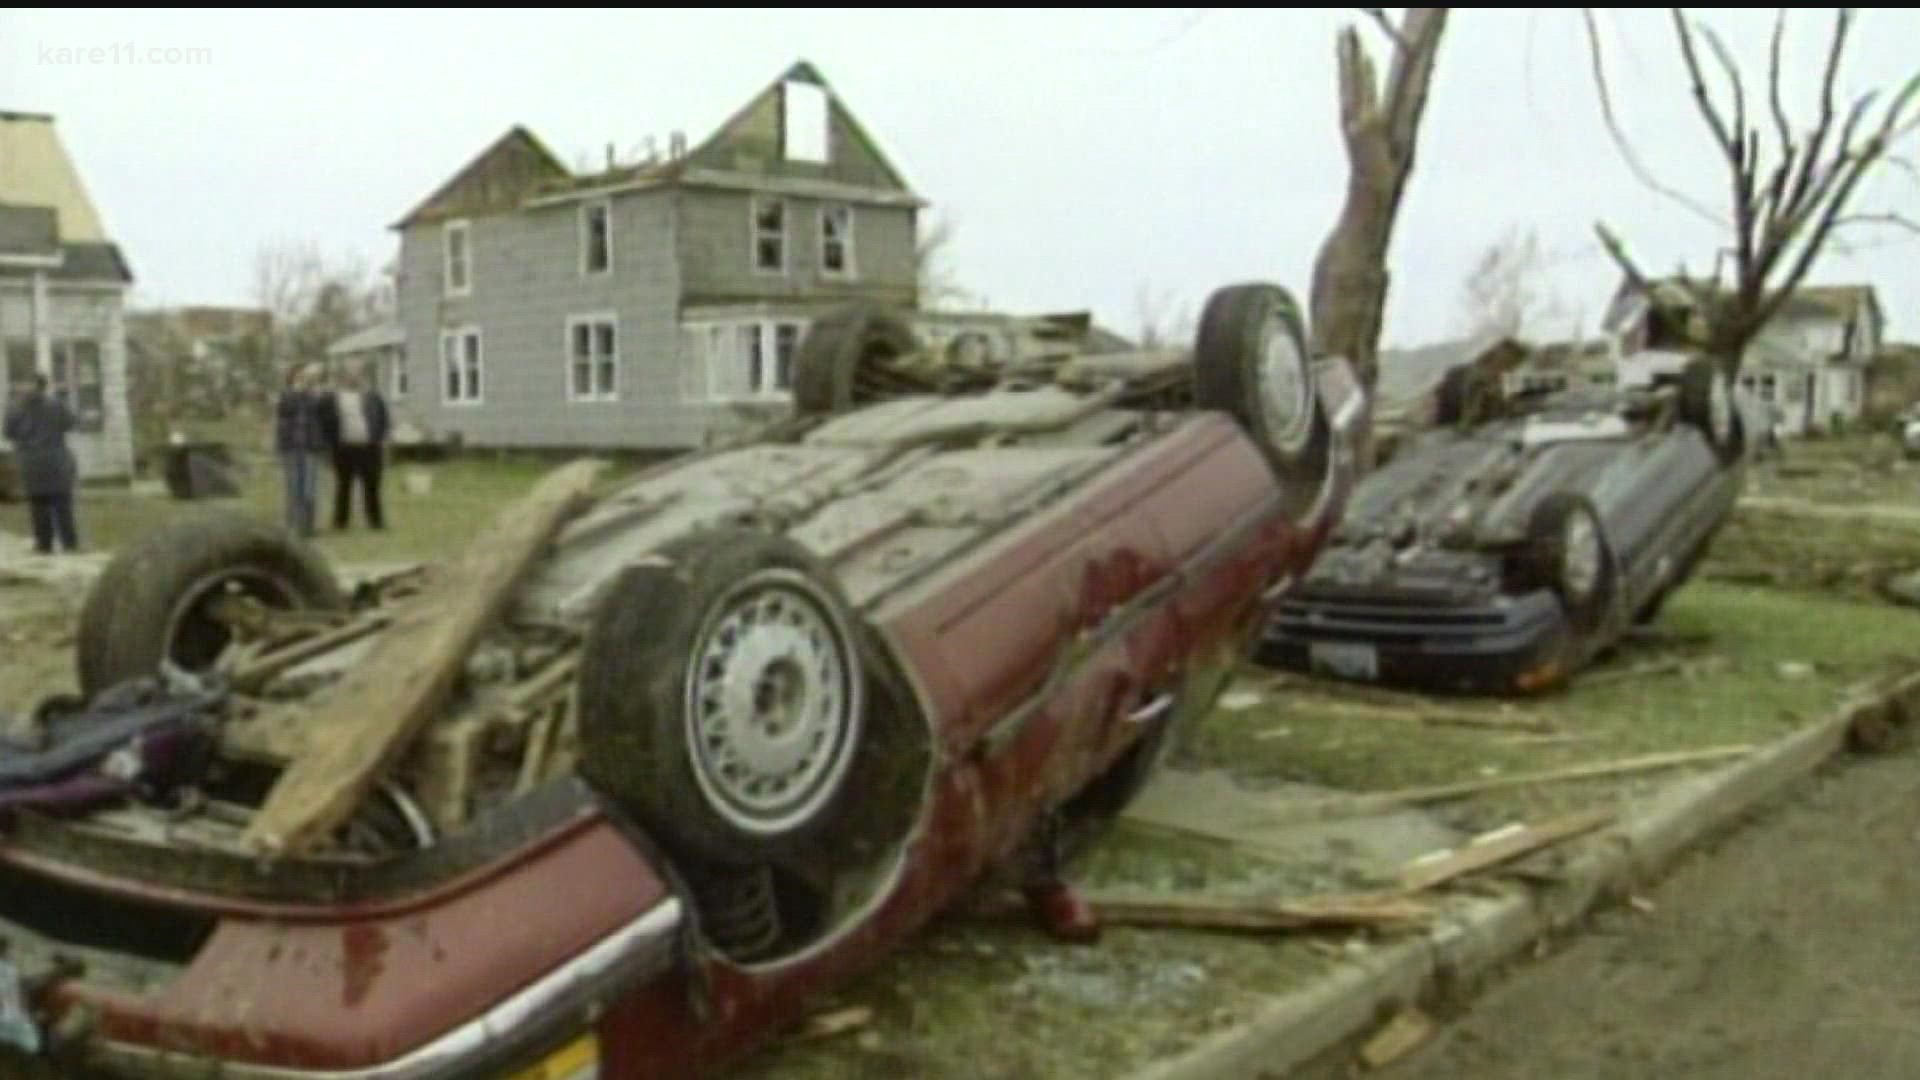 On March 29, 1998, an intense supercell spawned 14 tornadoes in the St. Peter-Comfrey region, killing two, injuring 21 others and leaving unthinkable destruction.